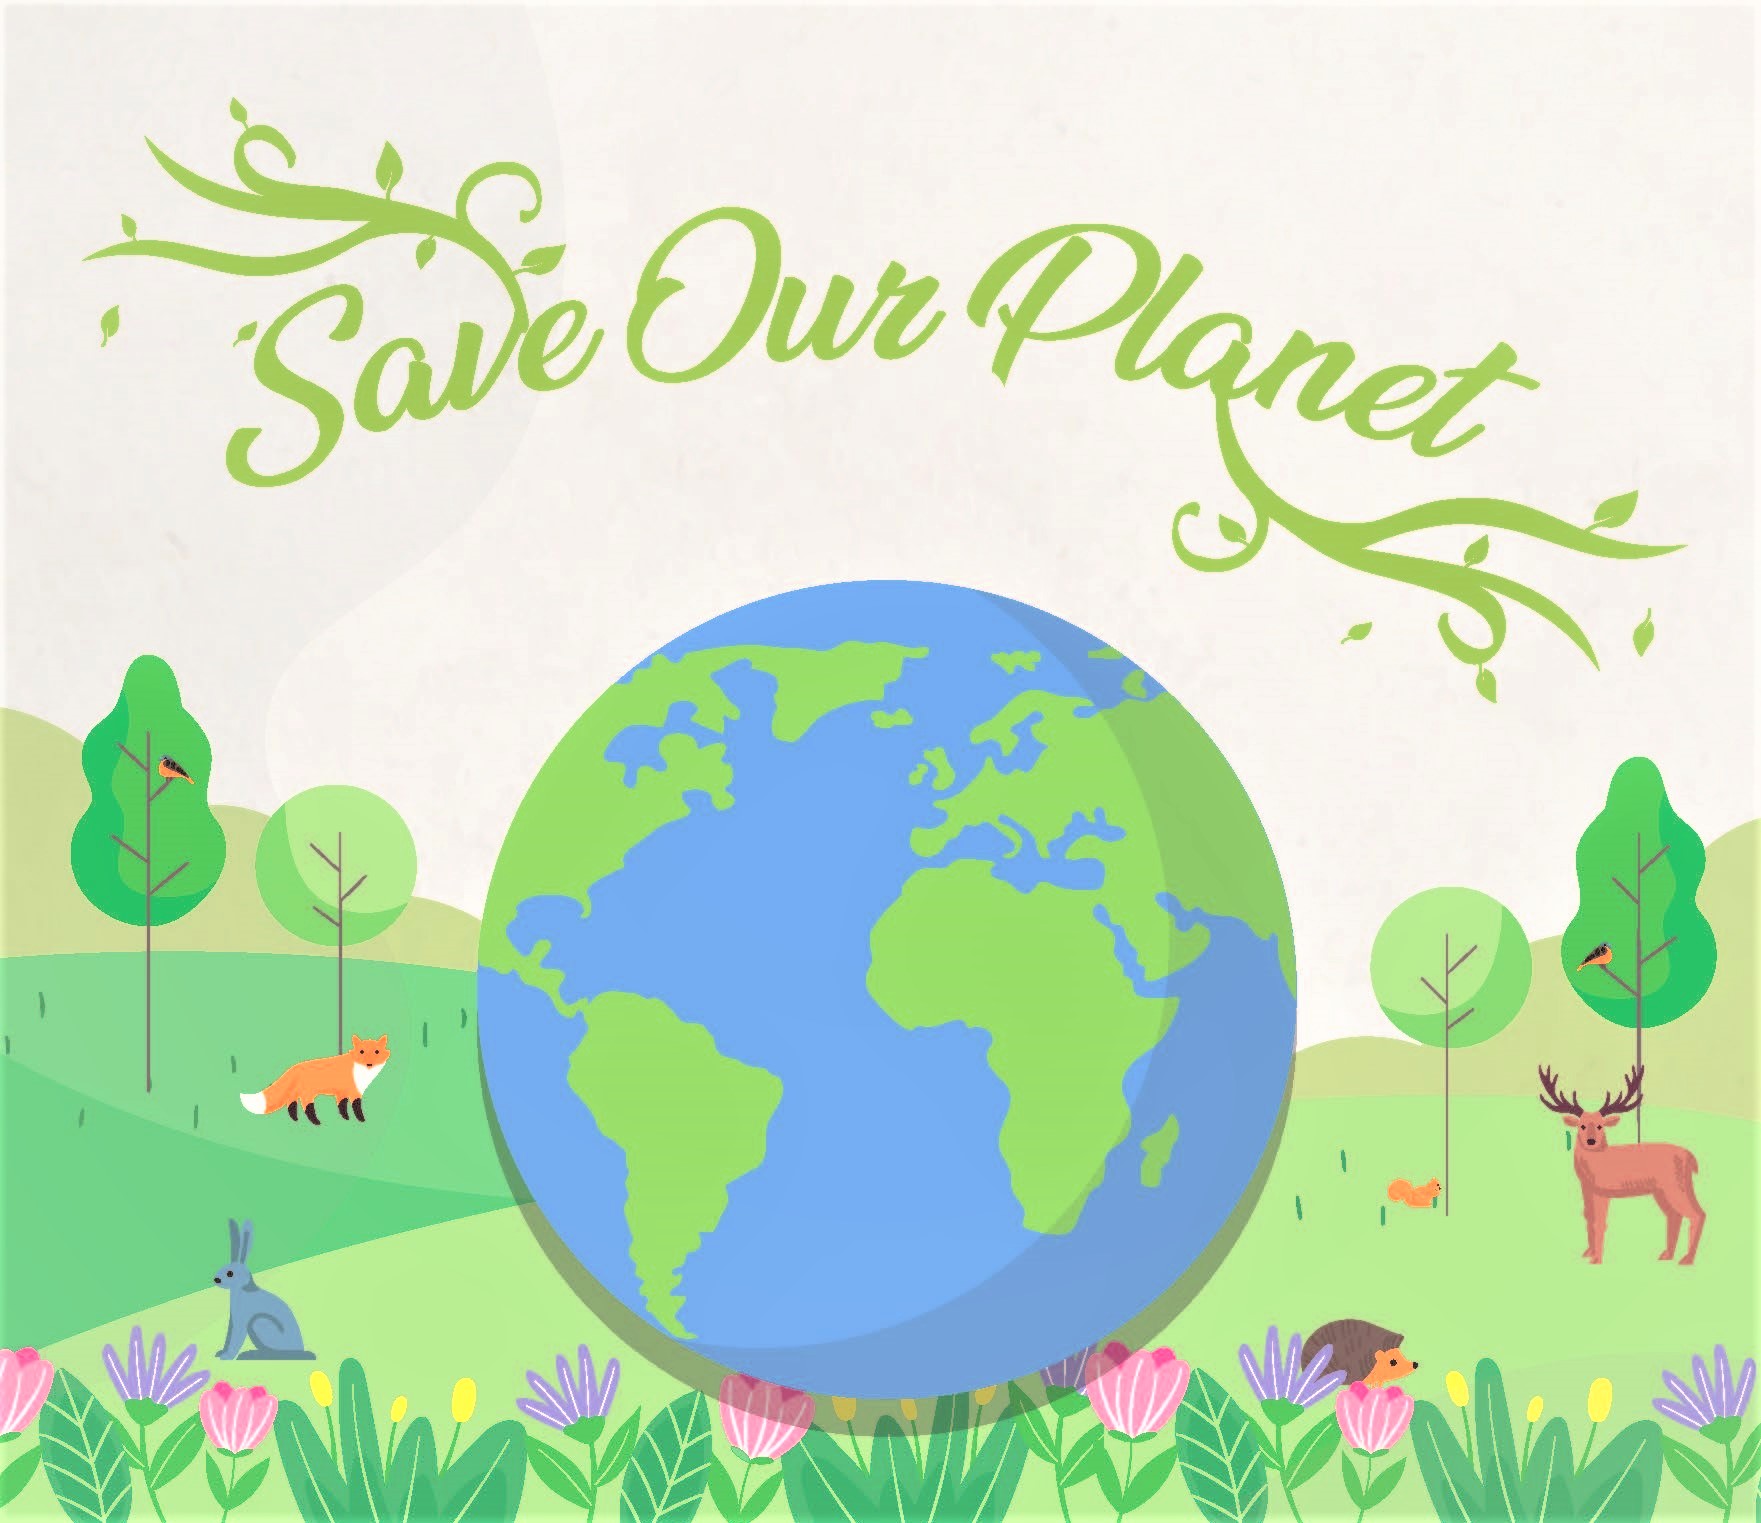 Earth Day Event